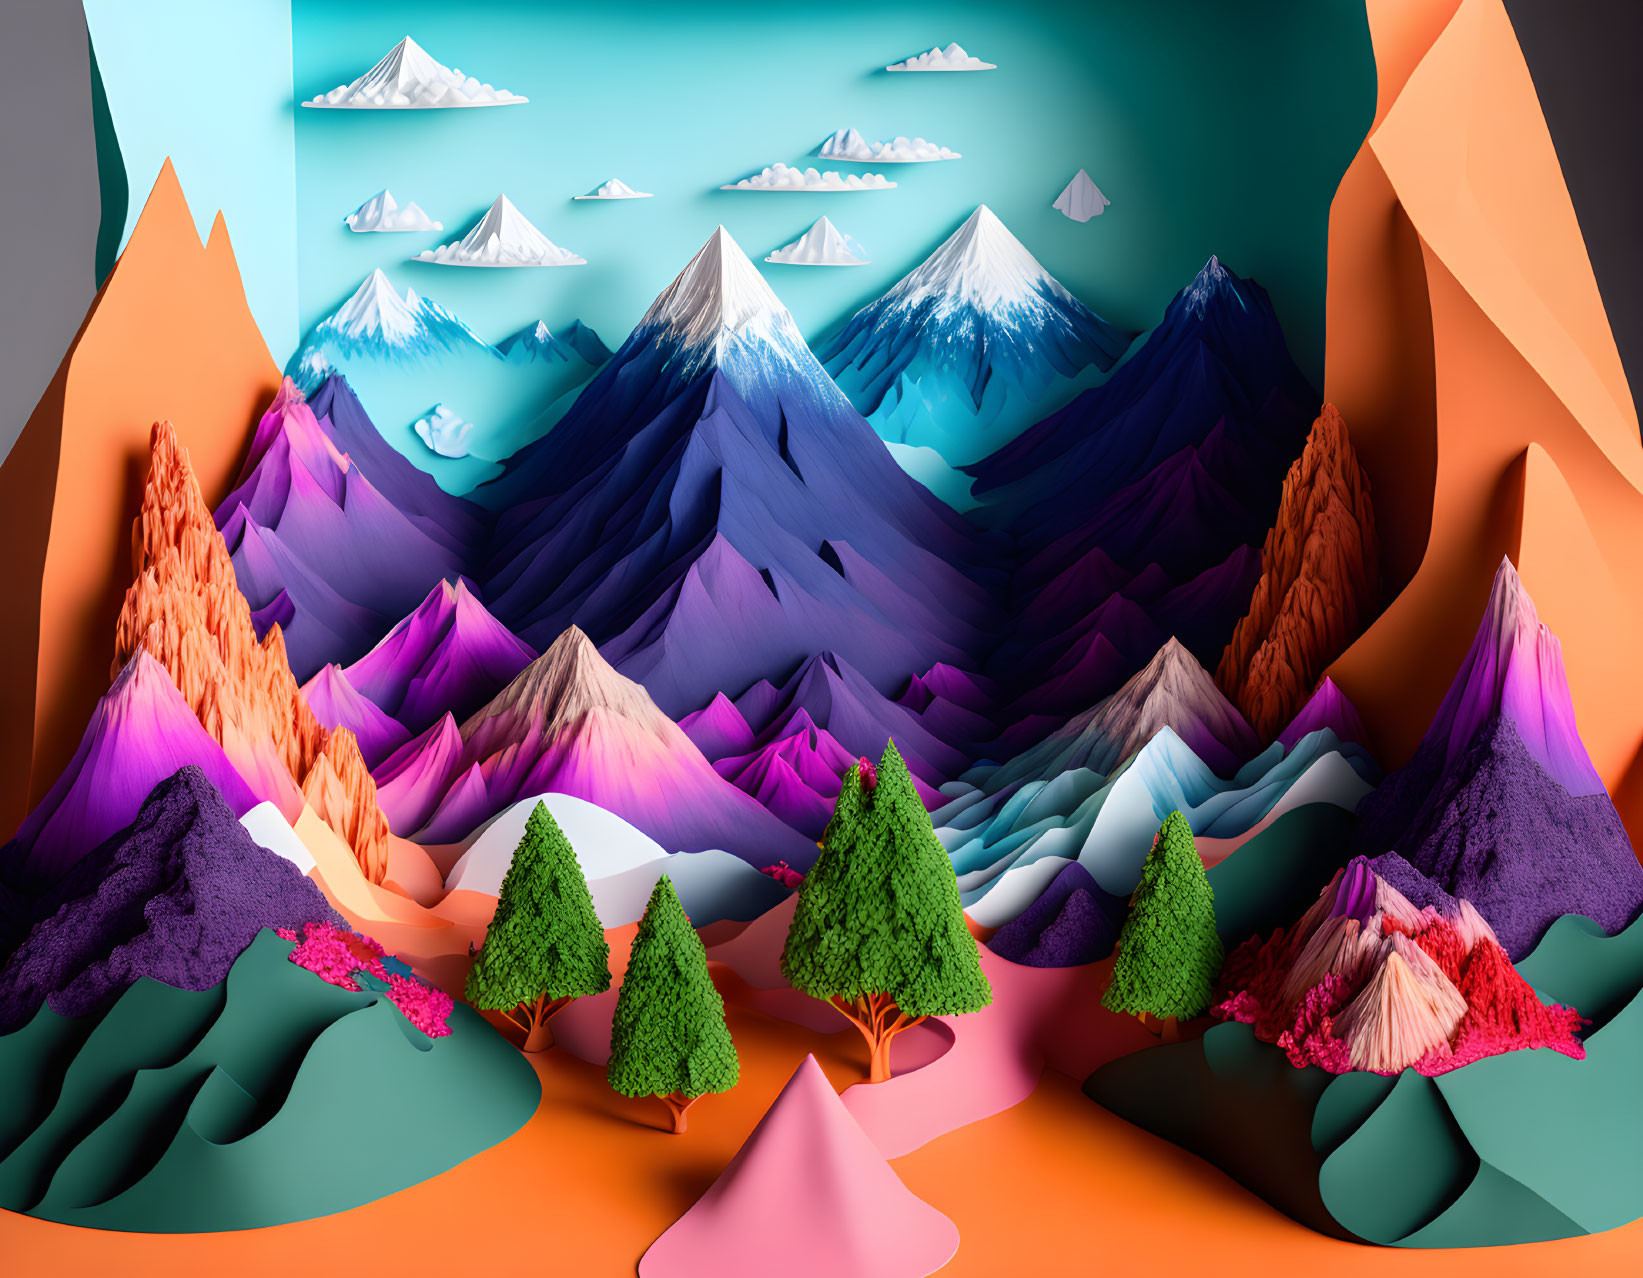 Colorful paper art landscape with mountains, trees, and geometric clouds on warm gradient.